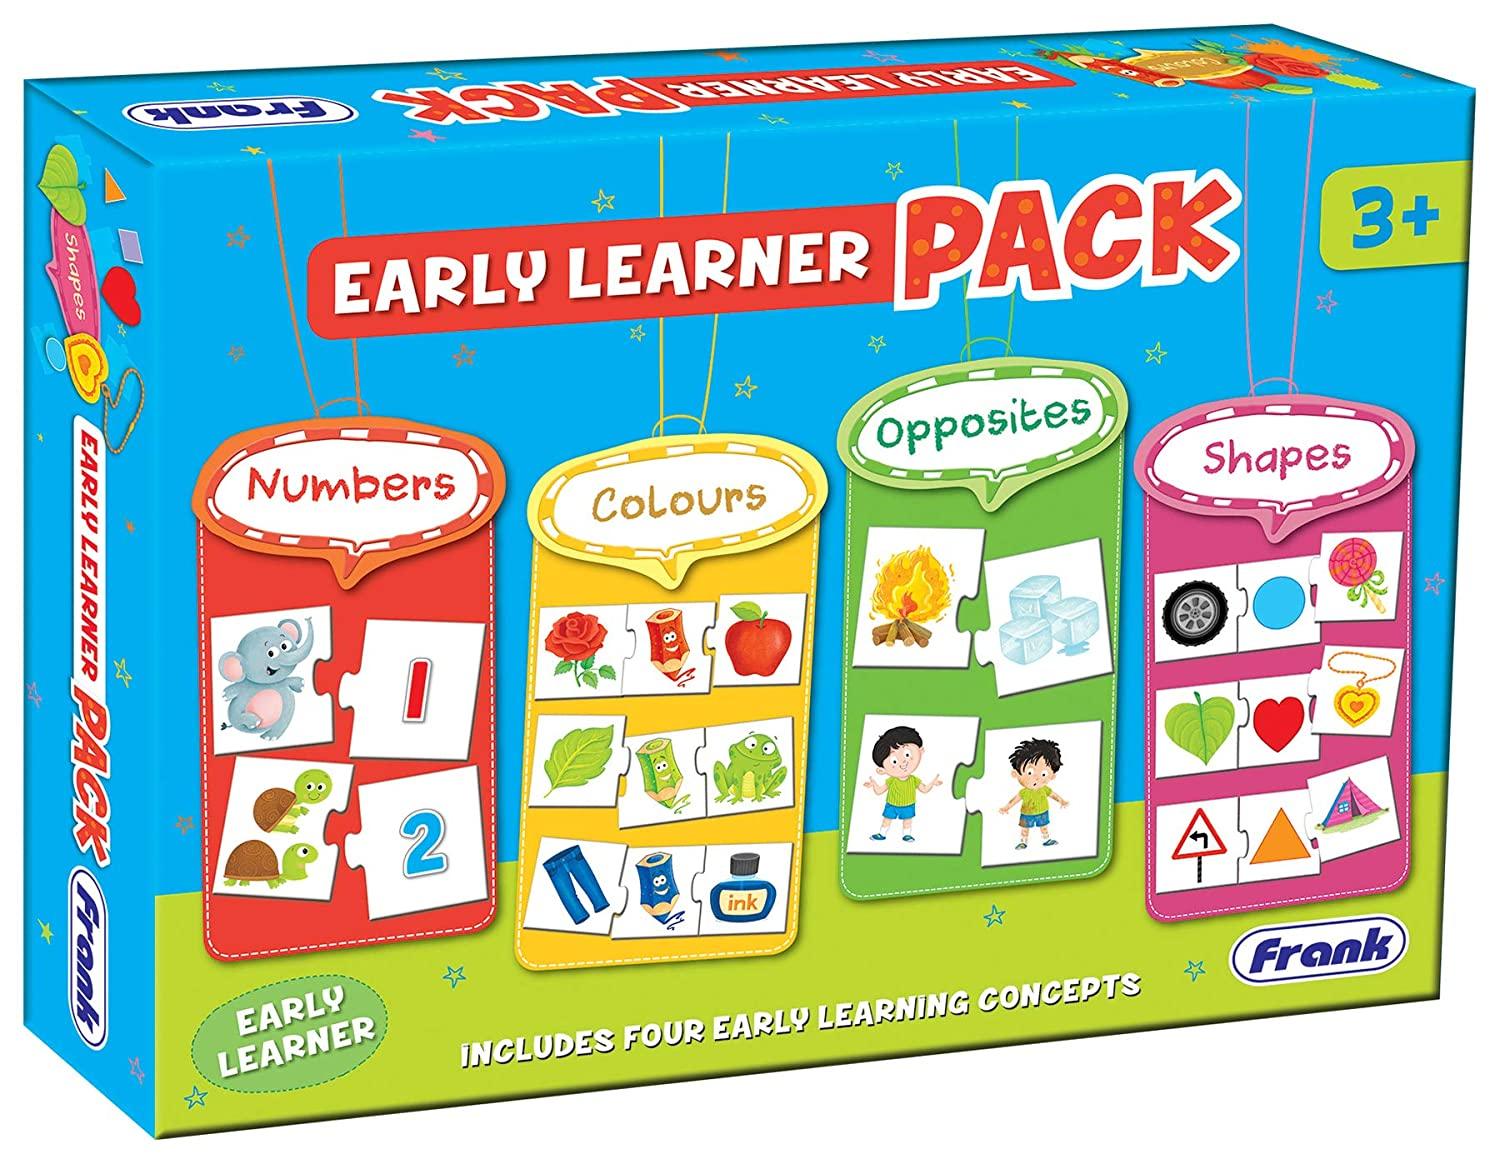 Frank Early Learner Pack ‚Äö√Ñ√¨ 88 Pieces, 20 2-Piece and 16 3-Piece Self-Correcting Puzzles for Ages 3 & Above